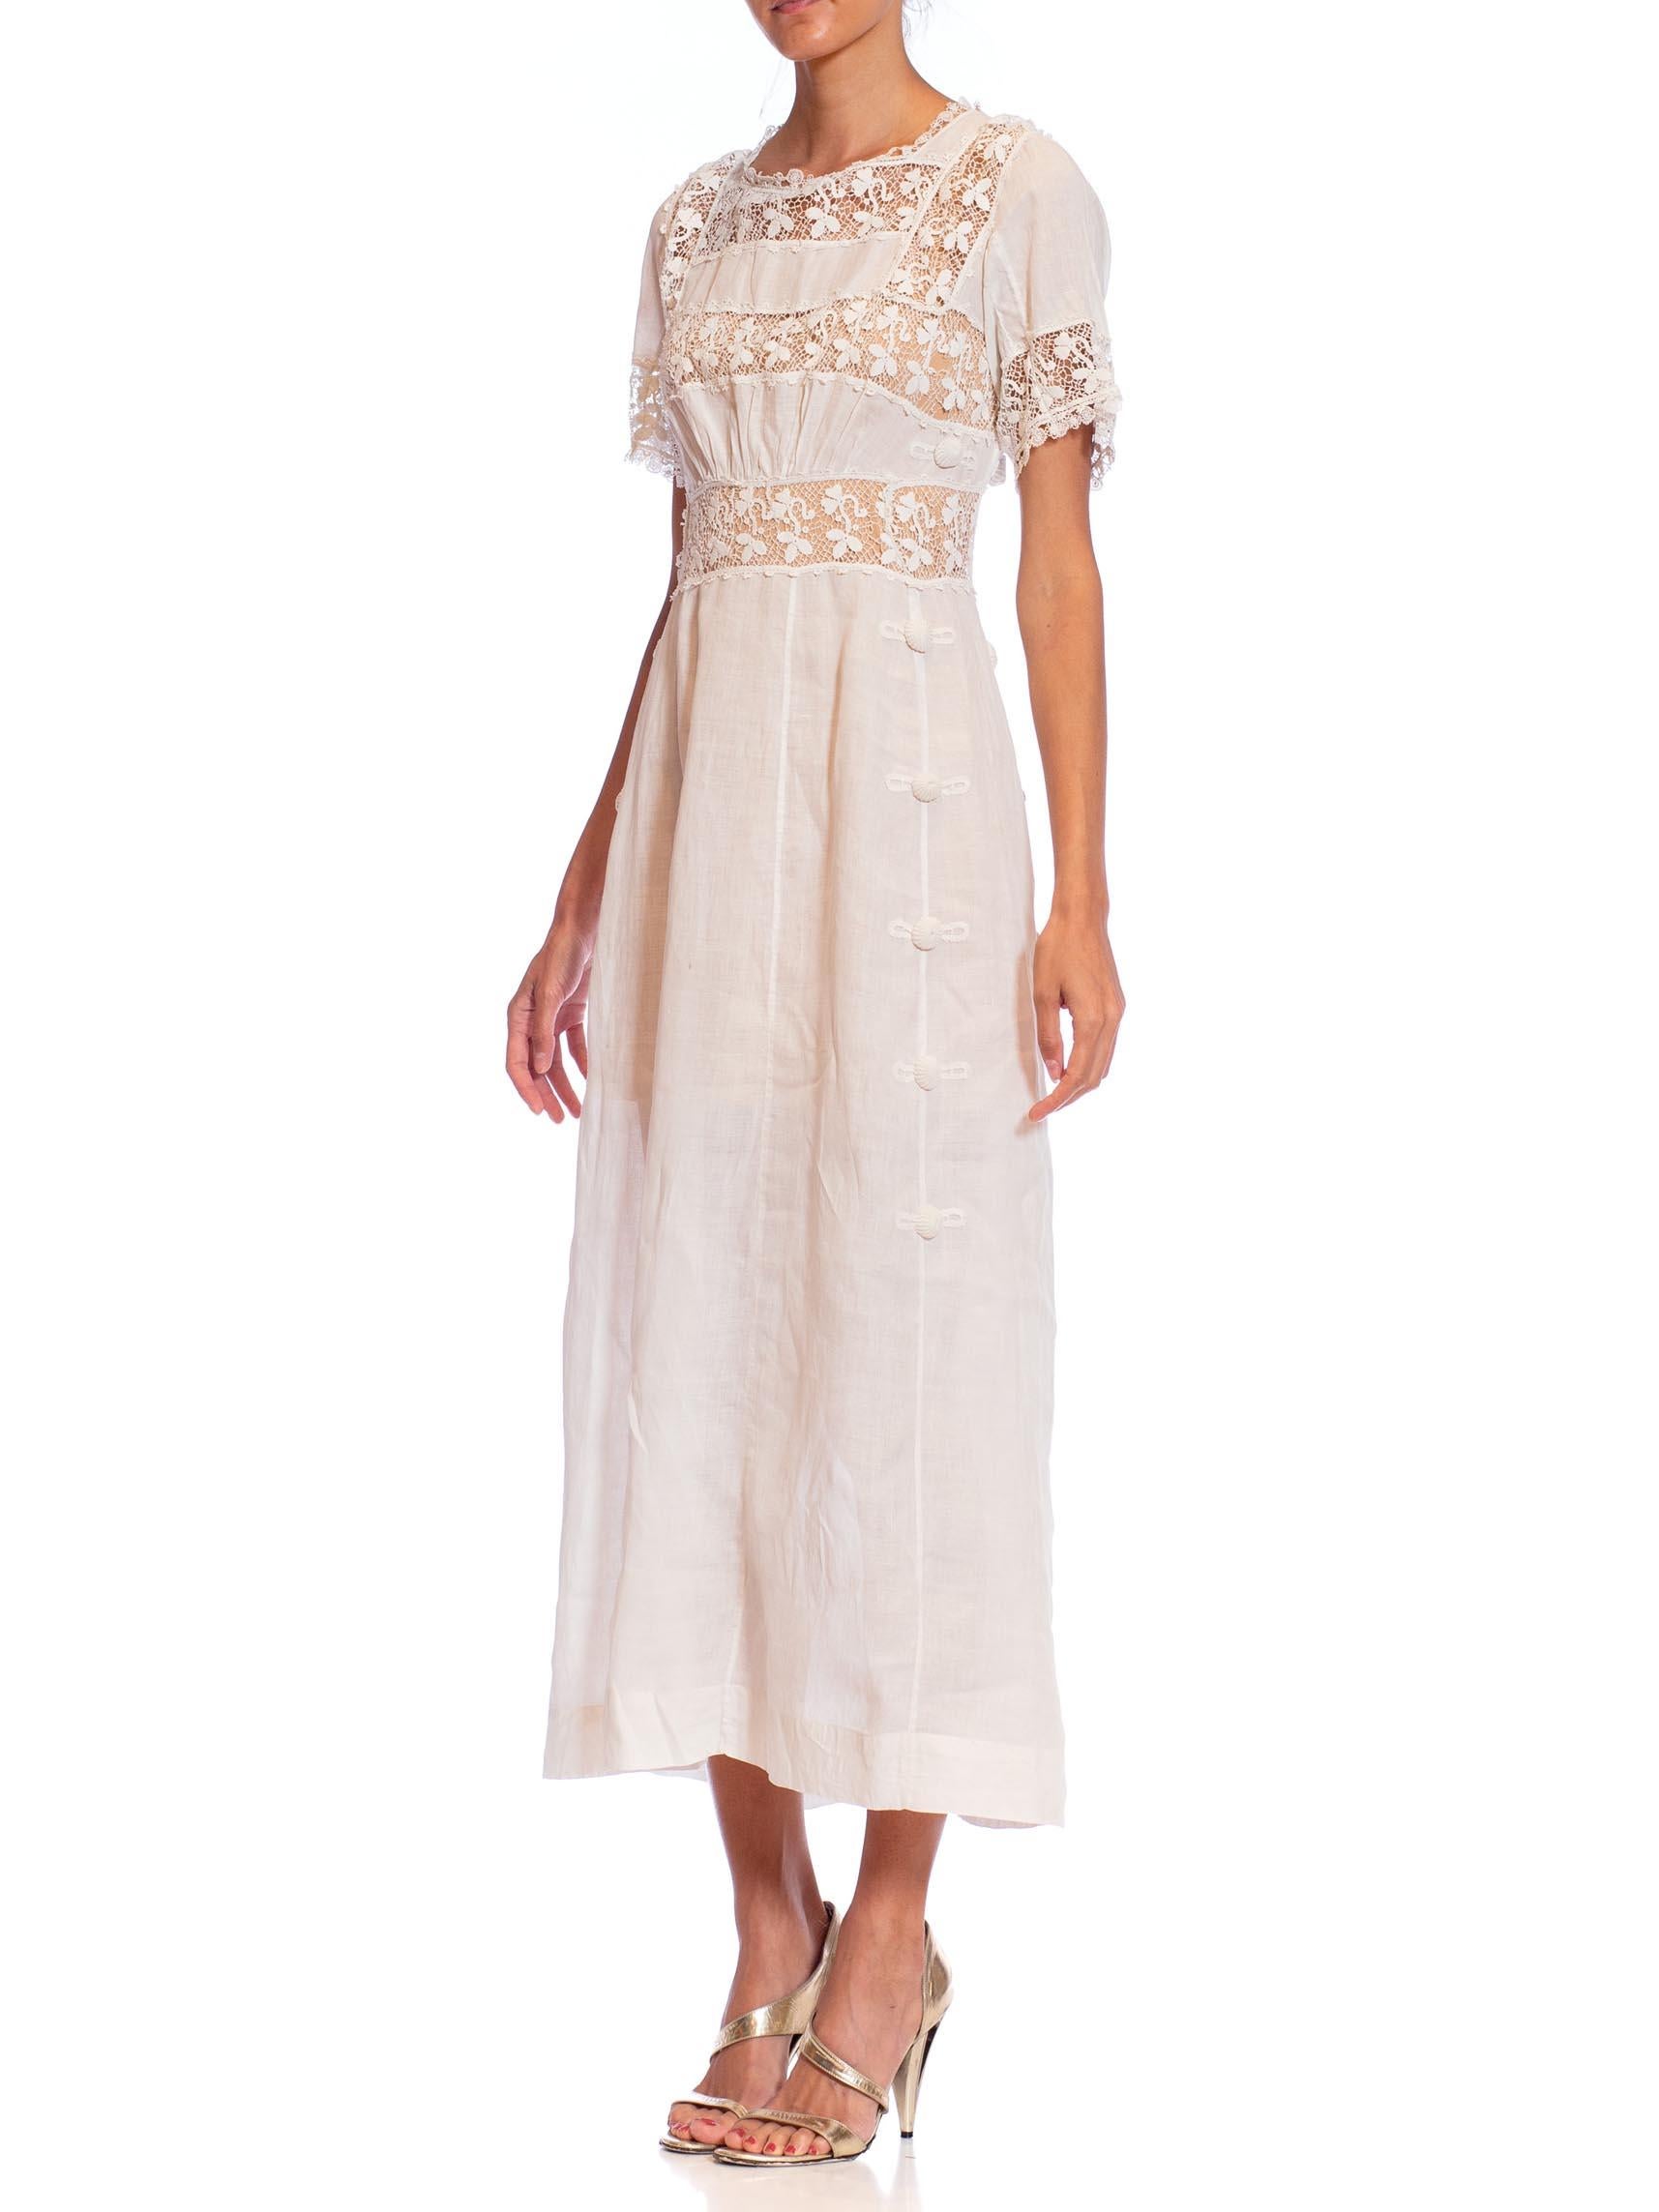 Women's Edwardian White Linen & Lace Tea Dress With Sleeves For Sale